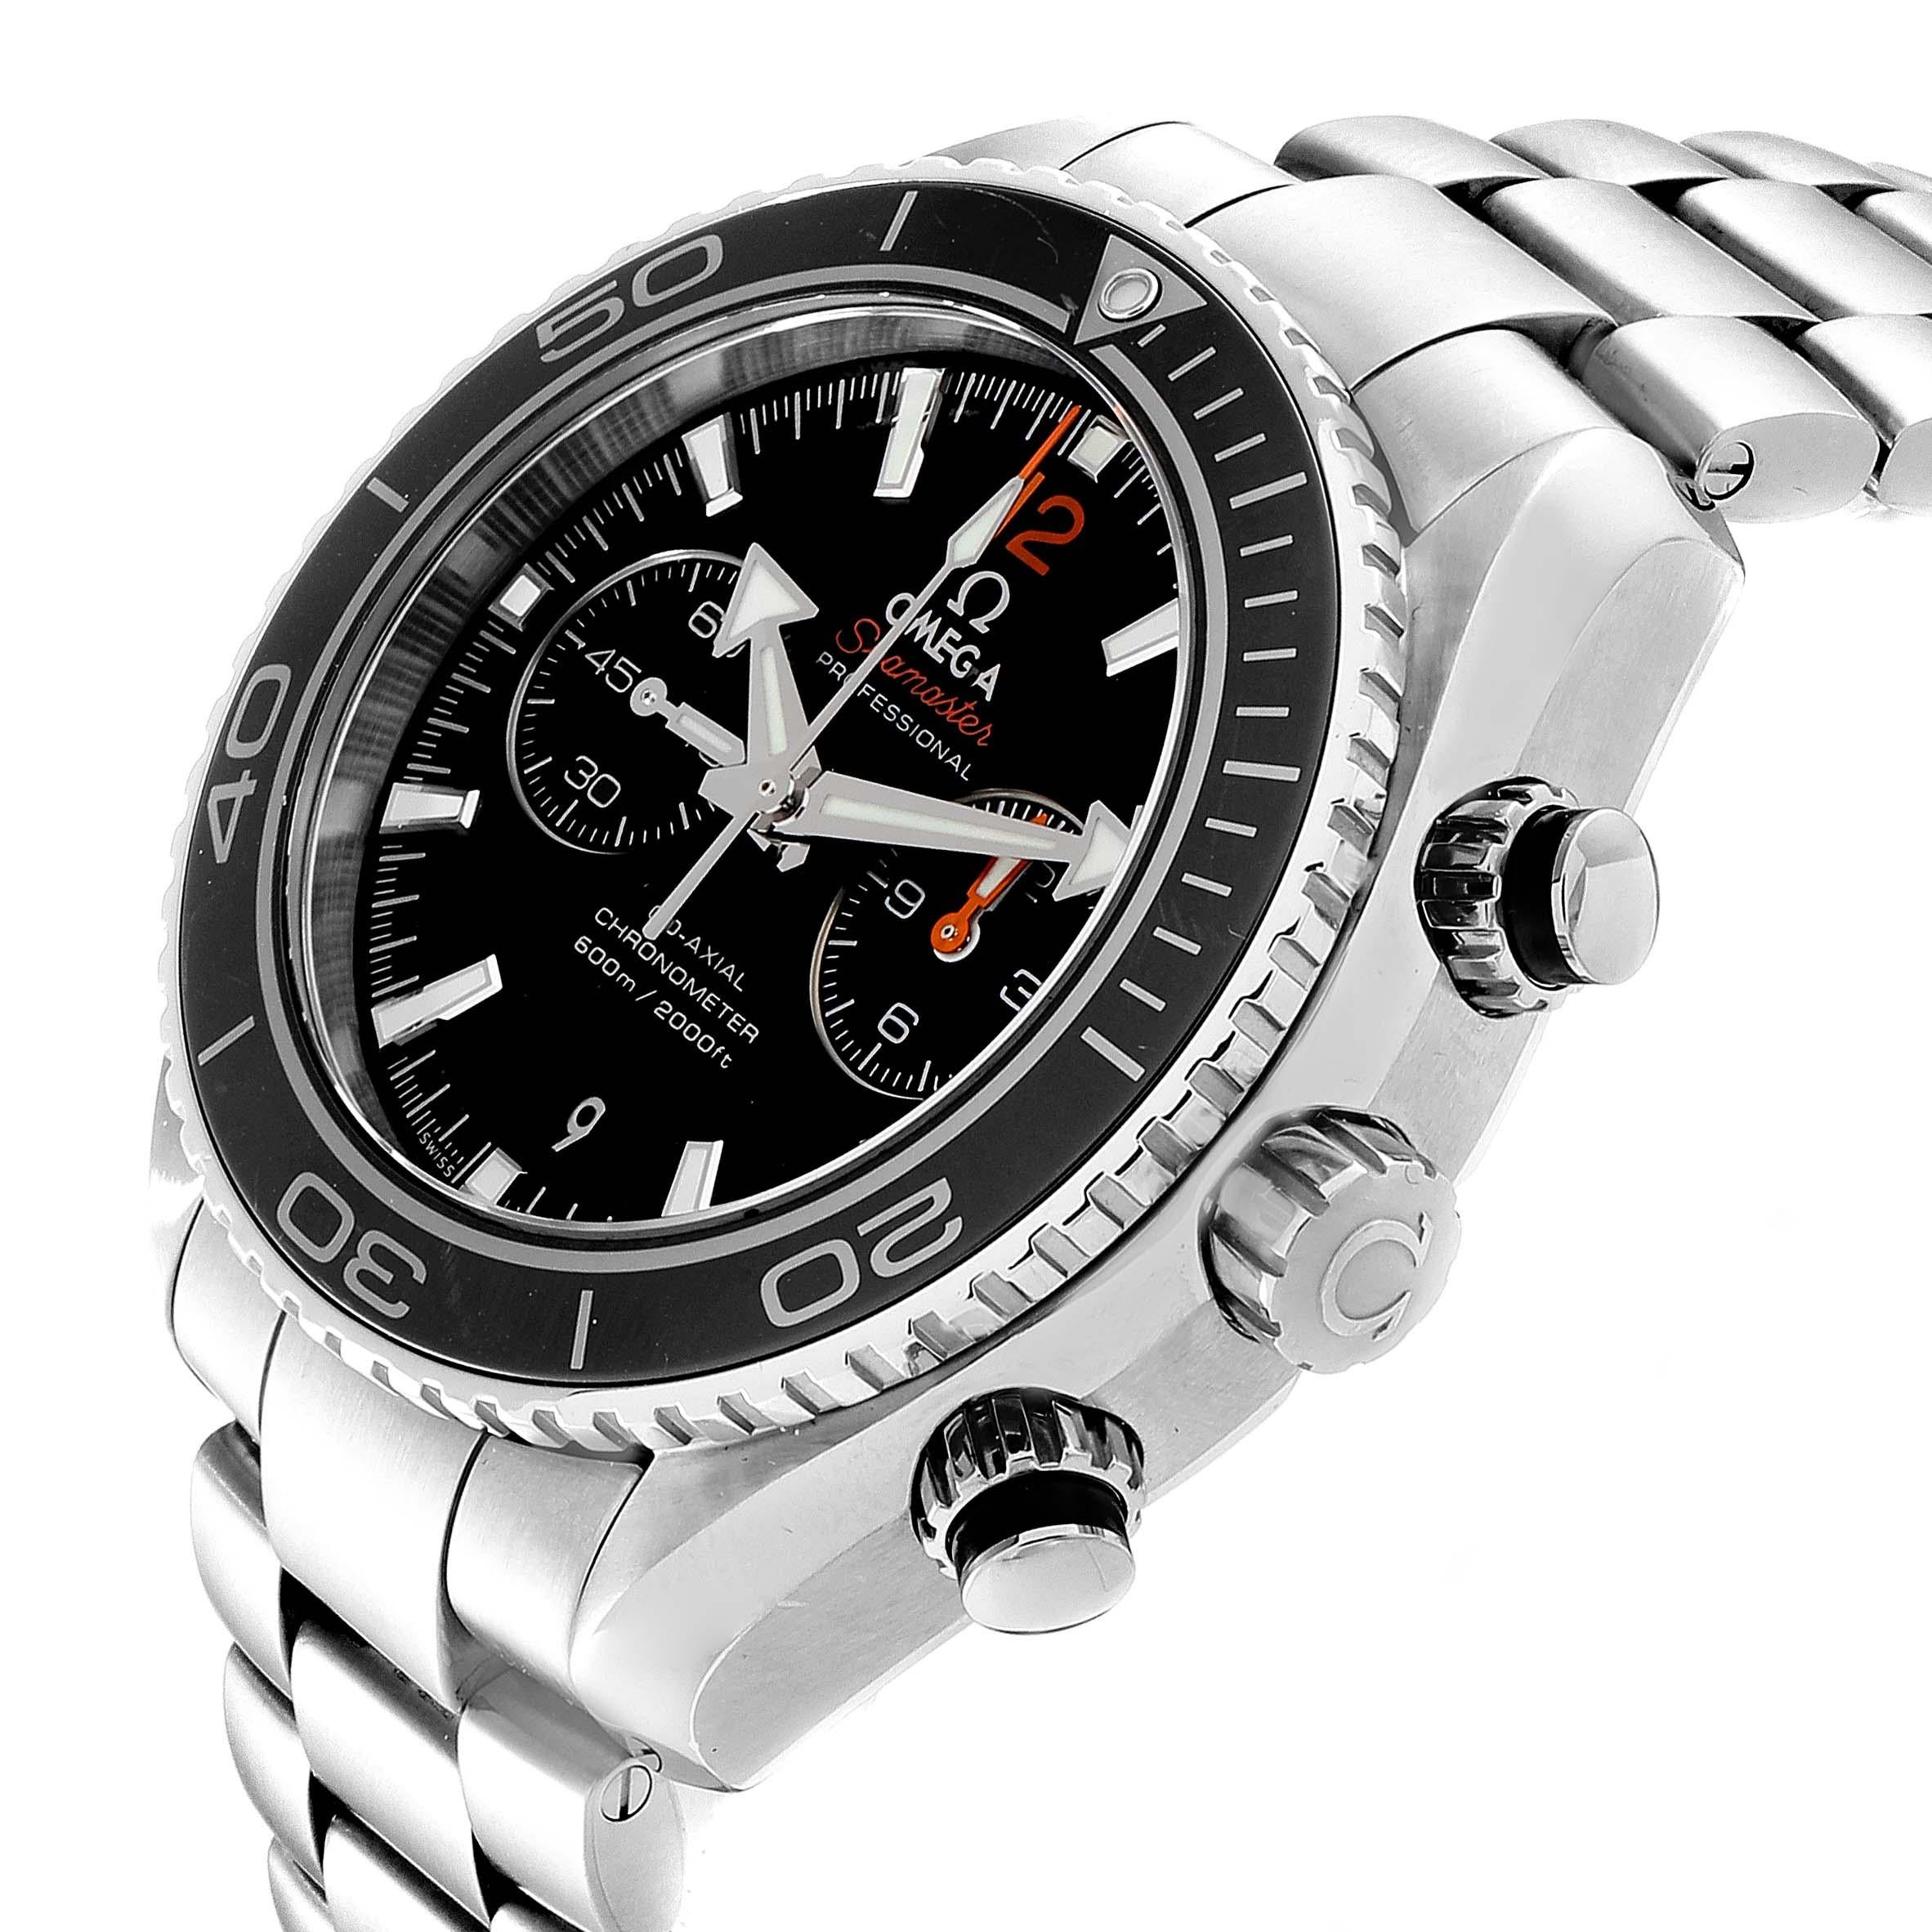 Omega Seamaster Planet Ocean Men's Watch 232.30.46.51.01.003 Box Card For Sale 2